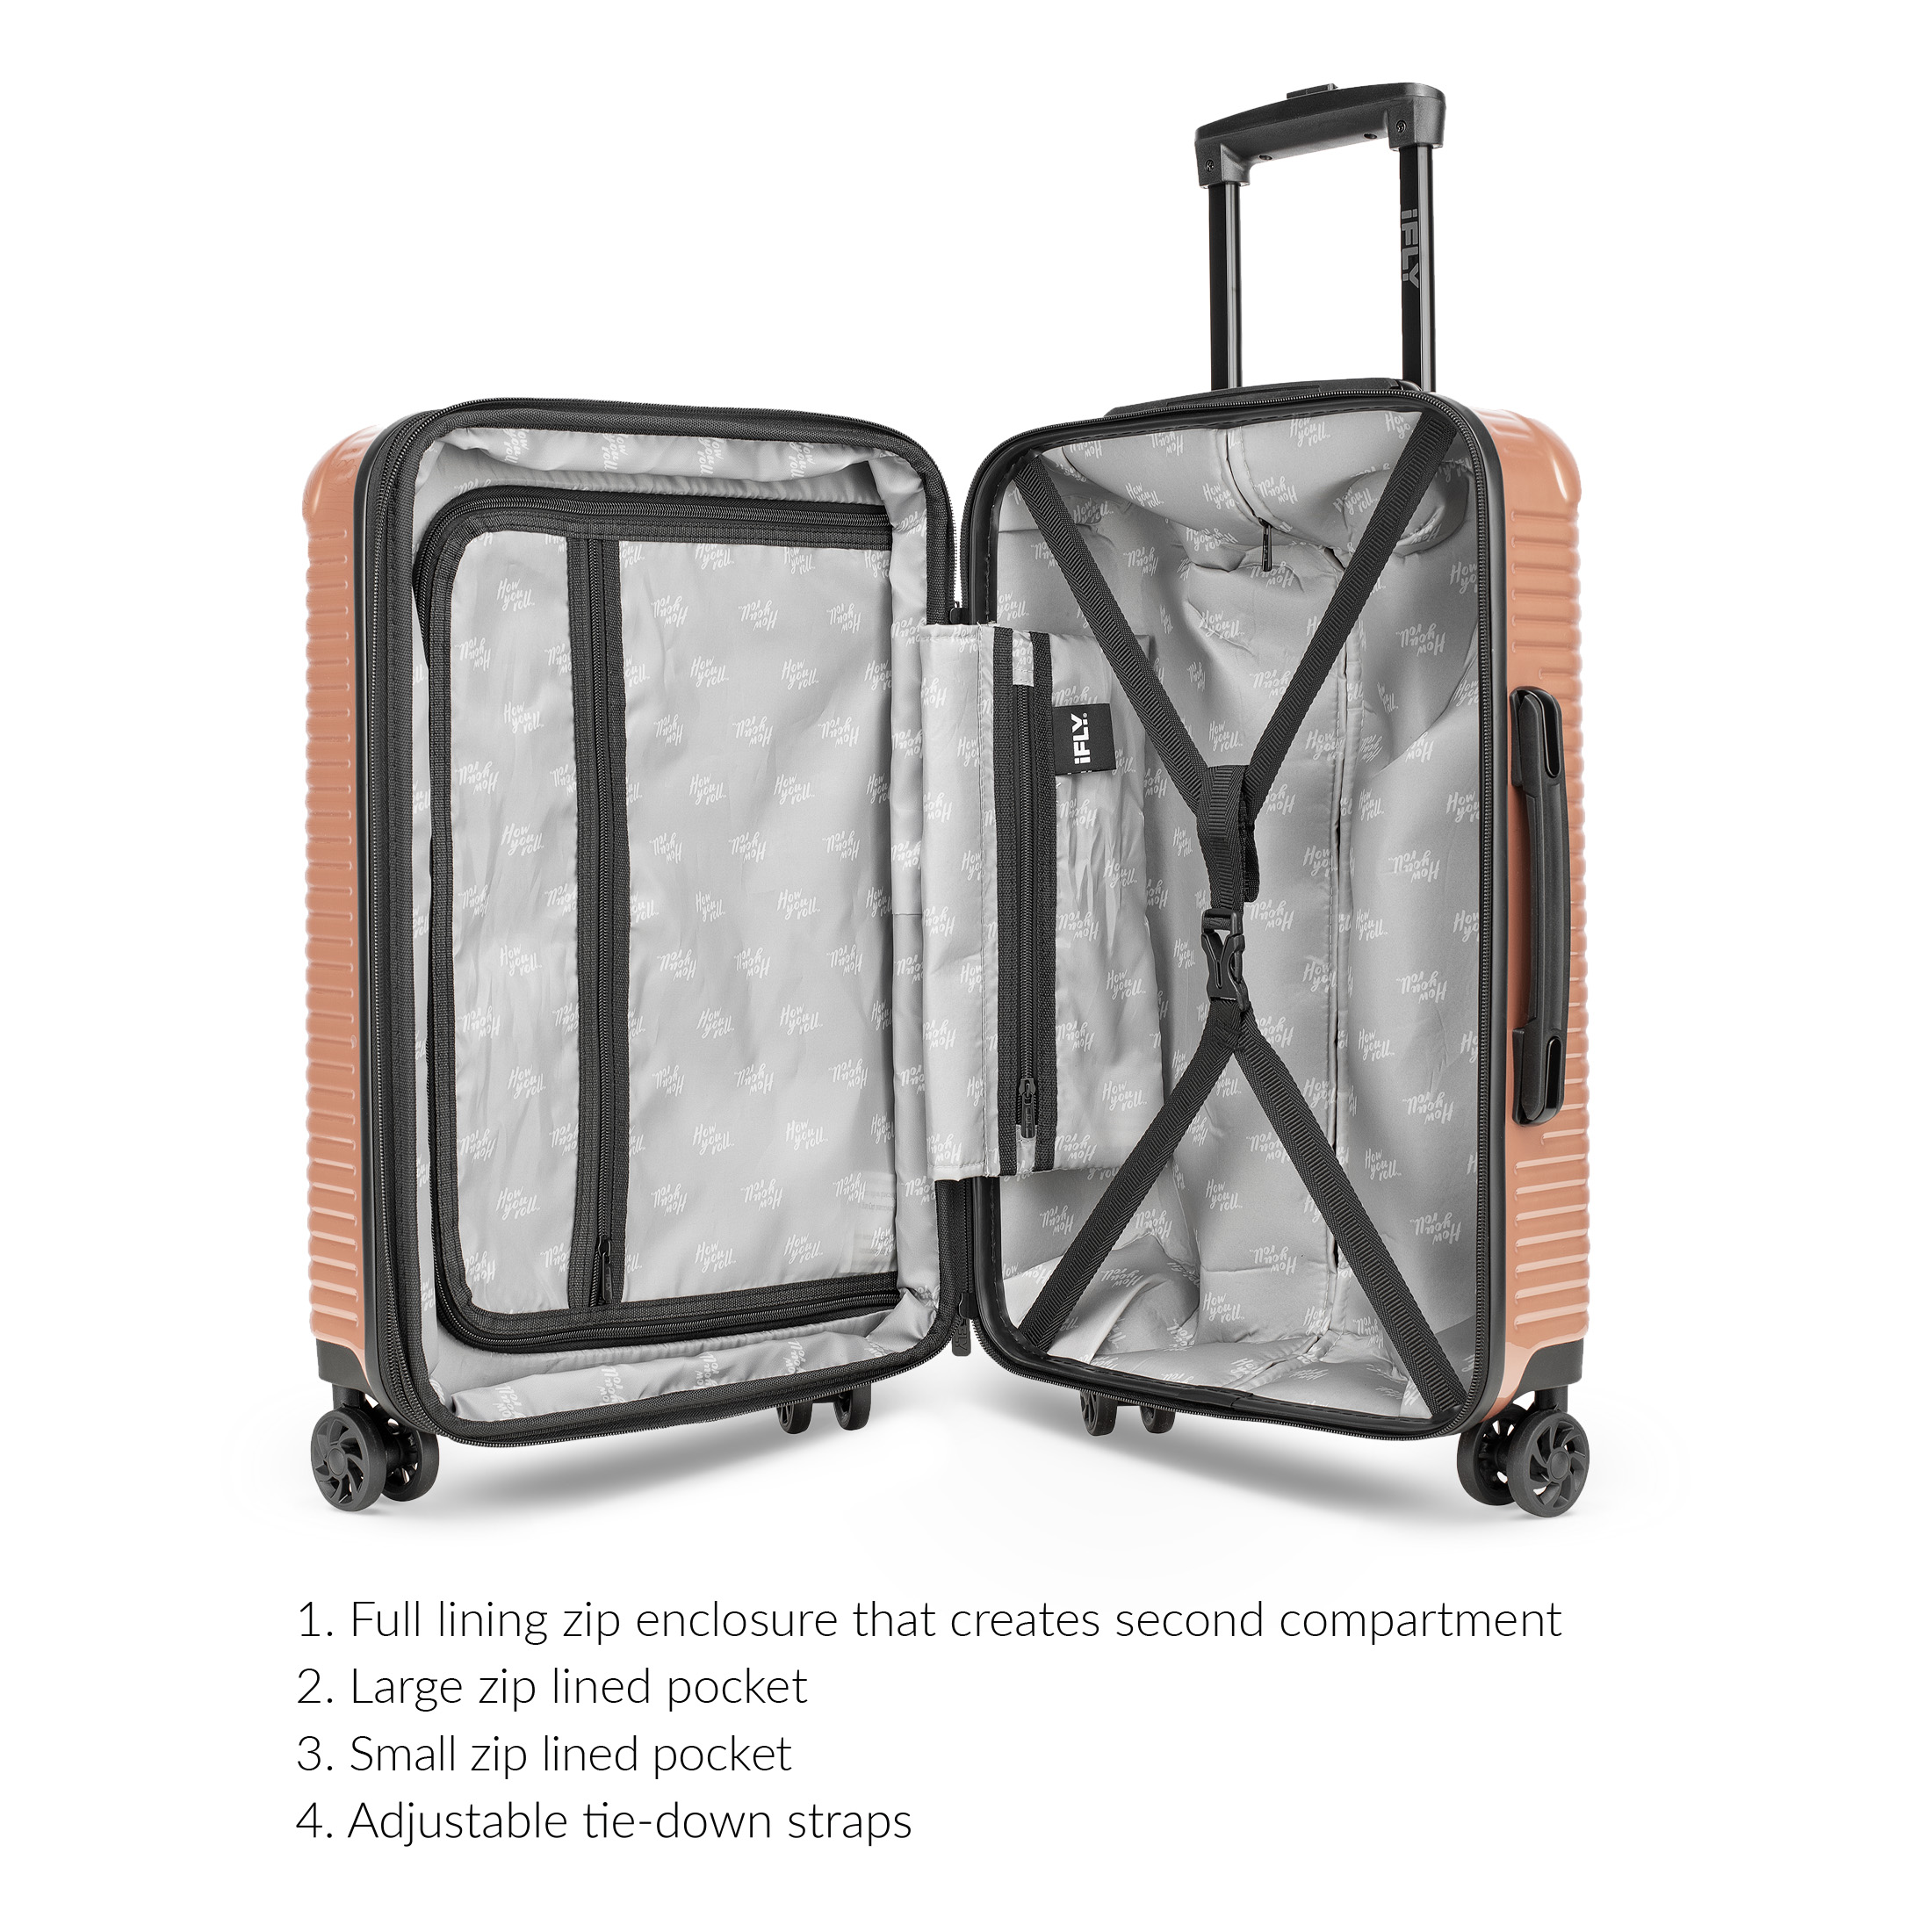 iFLY Hardside Alloy 20 Inch Carry-on, Copper - image 3 of 9